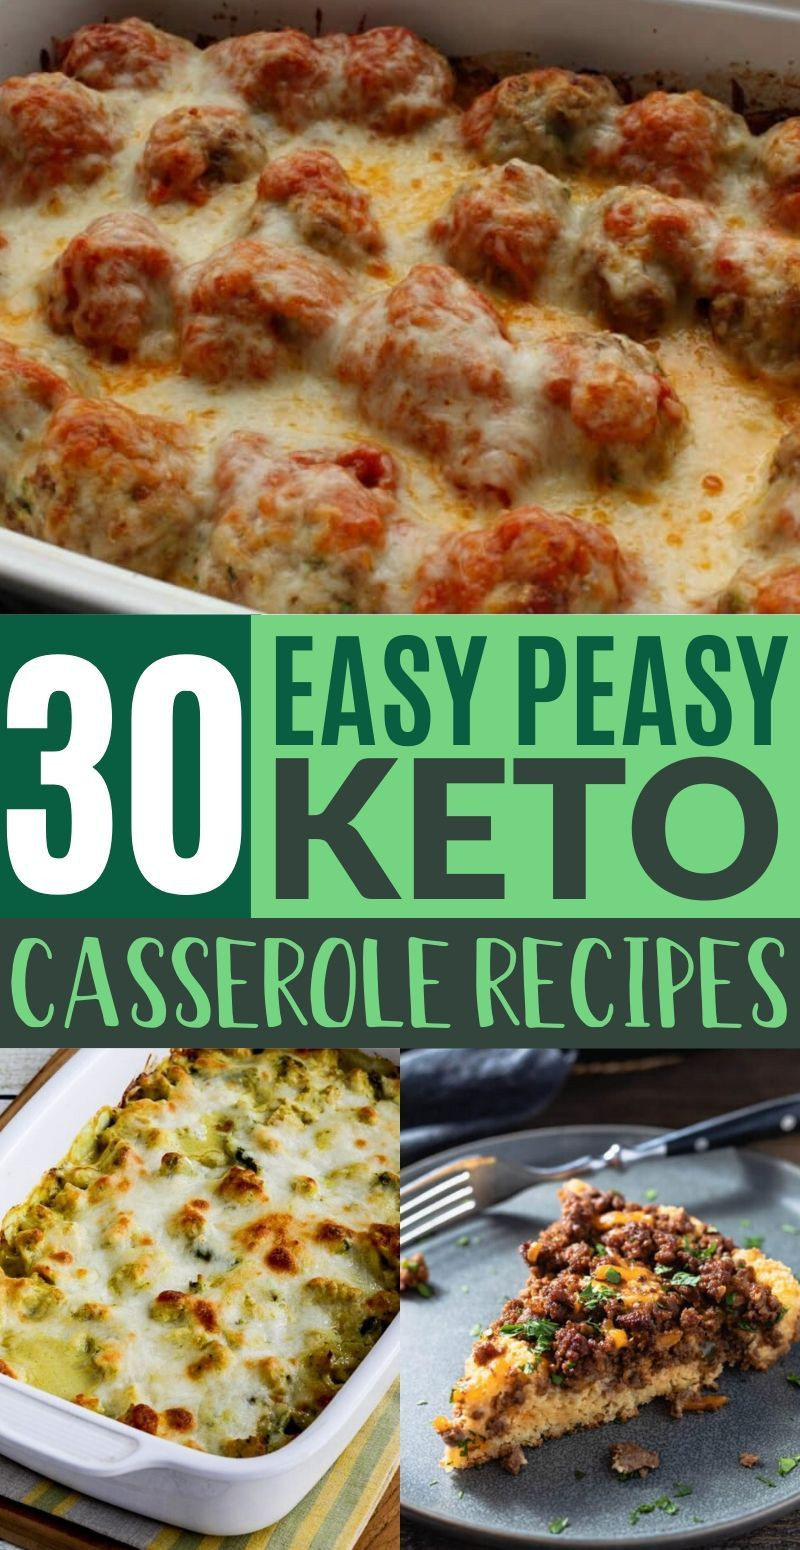 Clean Keto Casserole Recipes
 30 Easy Low Carb Casserole Recipes That Are Totally Keto